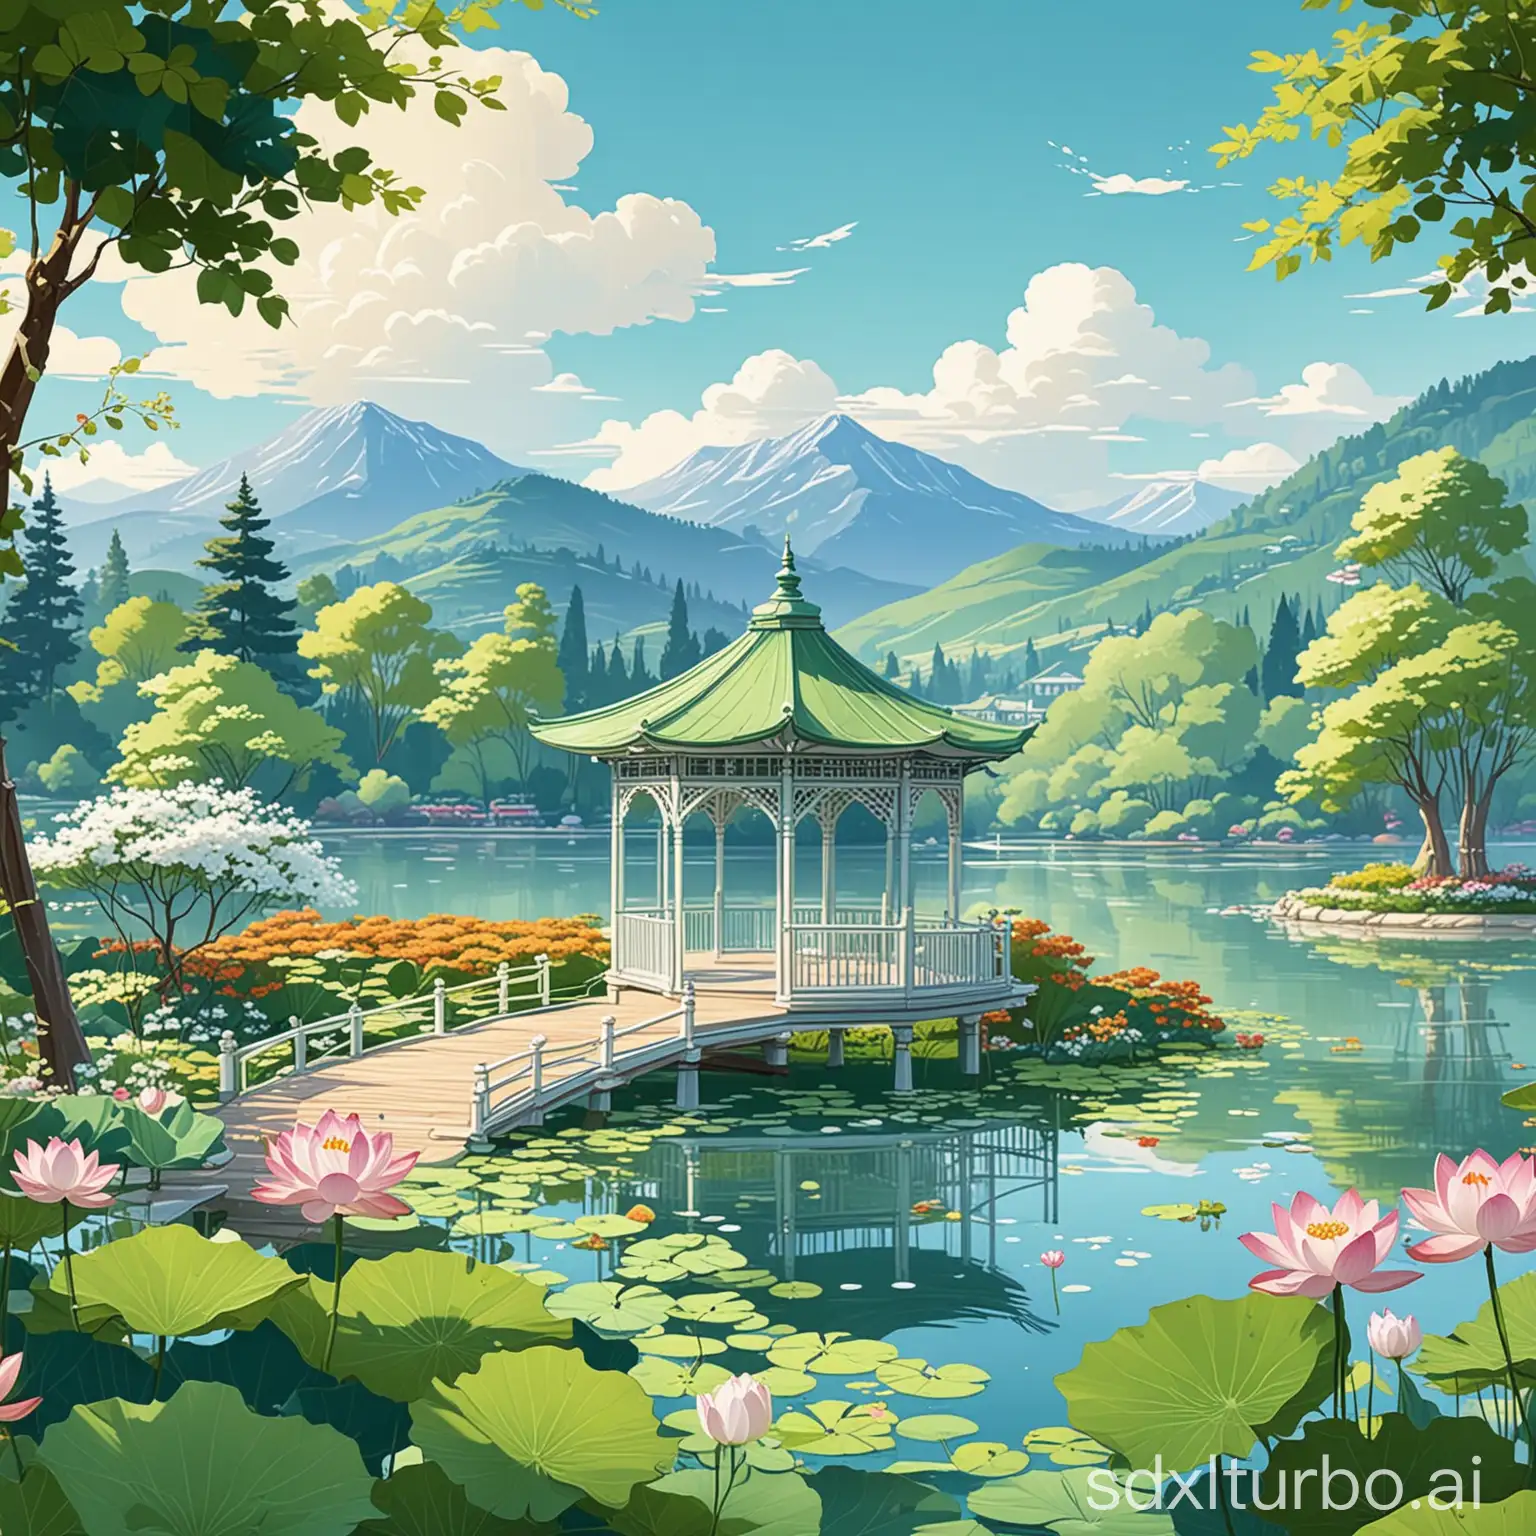 Tranquil-Lakeside-Pavilion-with-Lotus-Leaves-and-Cartoon-Characters